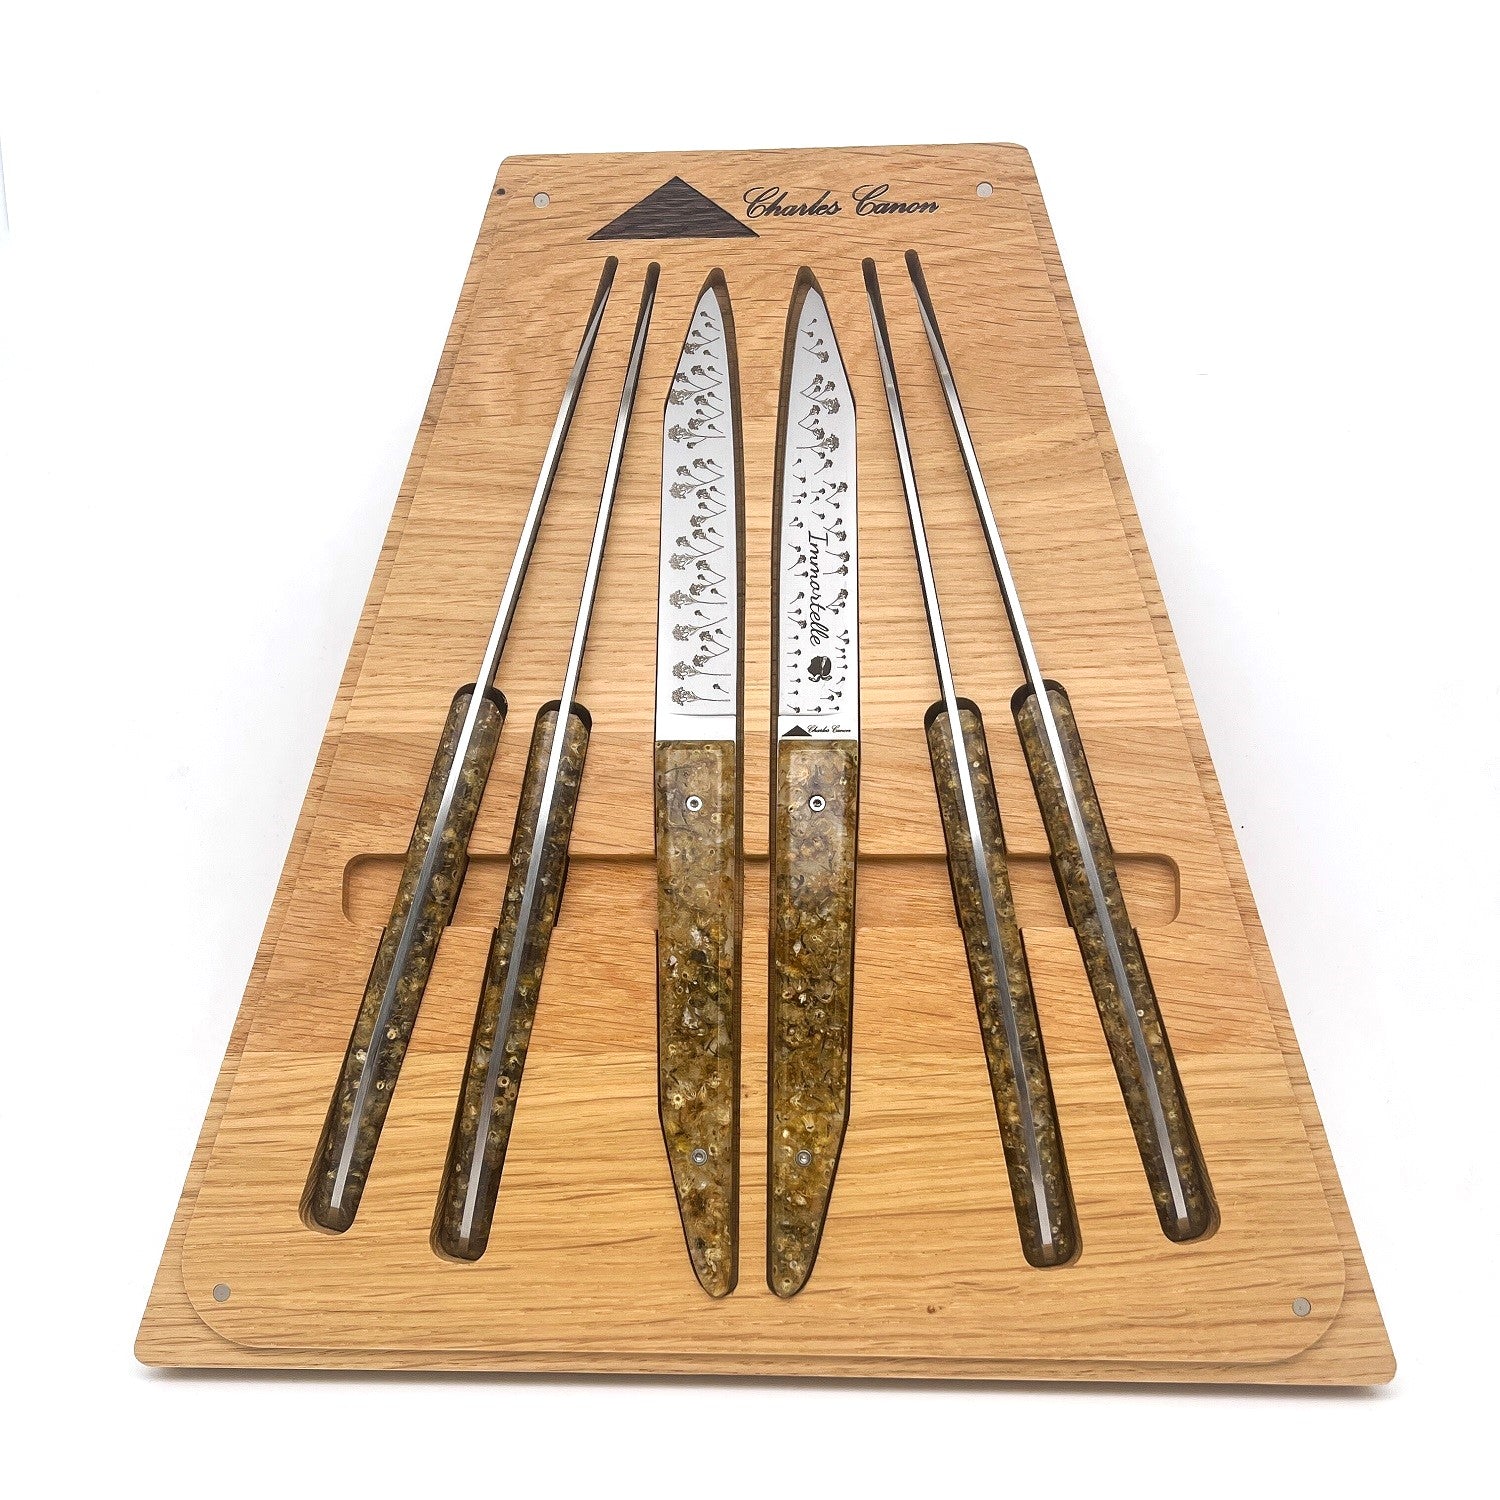 6 table knives with their handles made of Corsican immortelle flowers